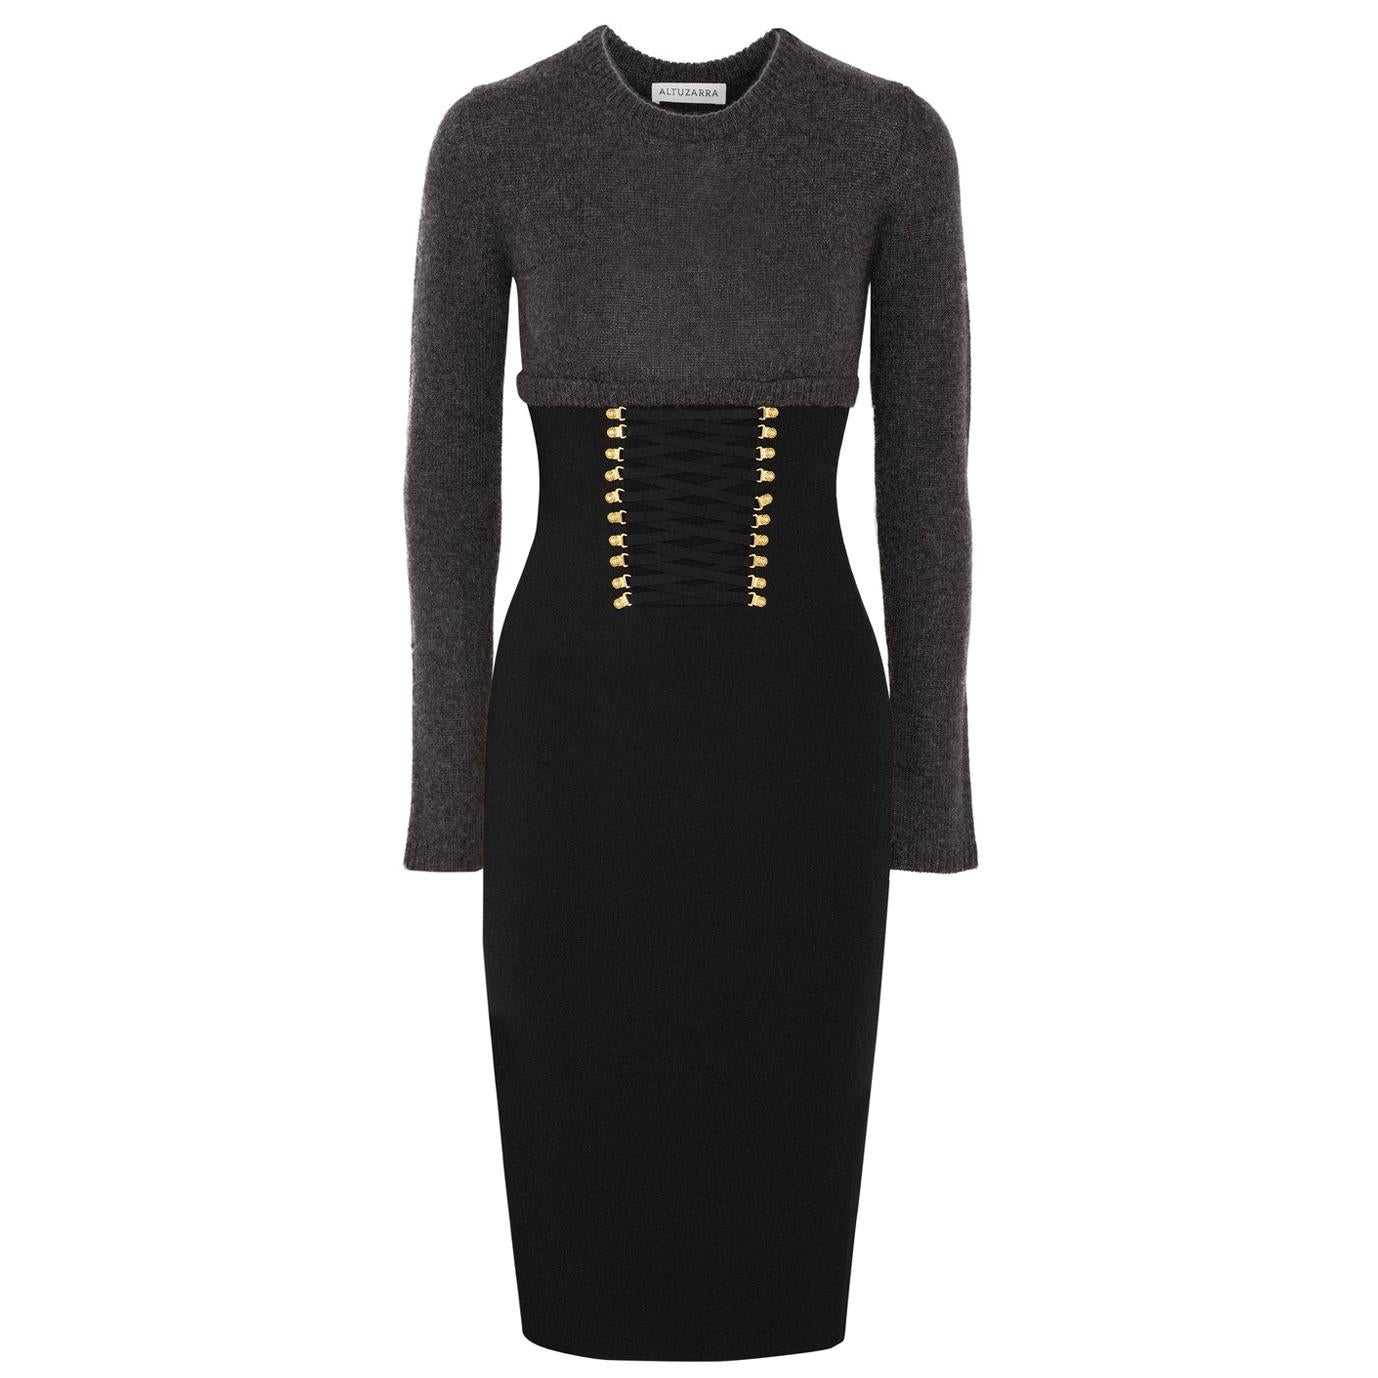 Altuzarra Ursula Two-Tone Lace-Up Detailed Knitted Dress